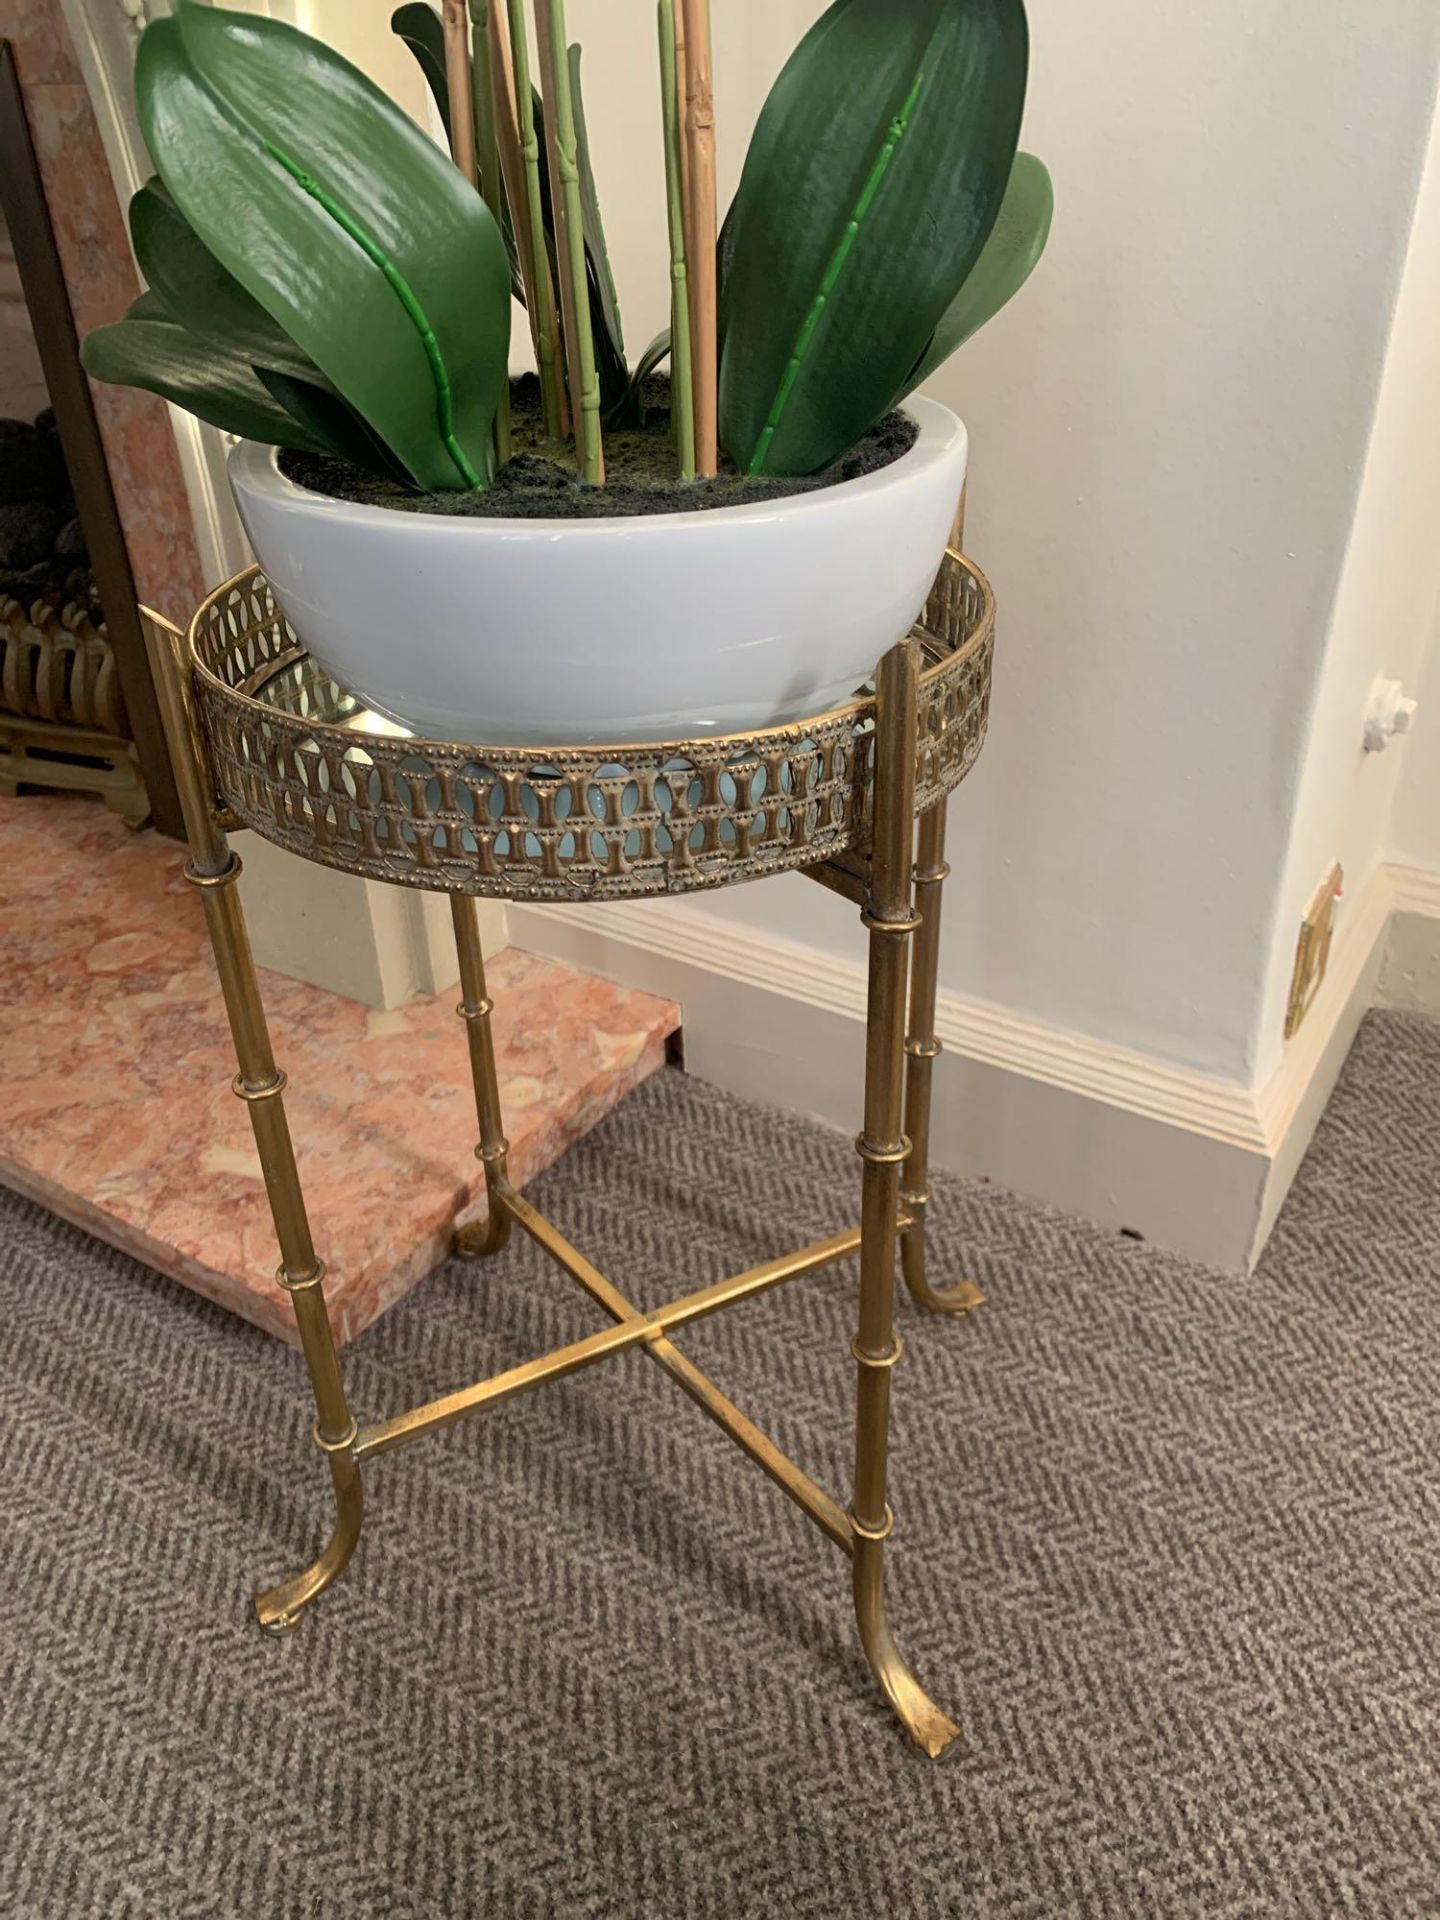 A mirrored top antique brass brass jardinere stand with planter and artificial plant R149 ( East - Bild 2 aus 3